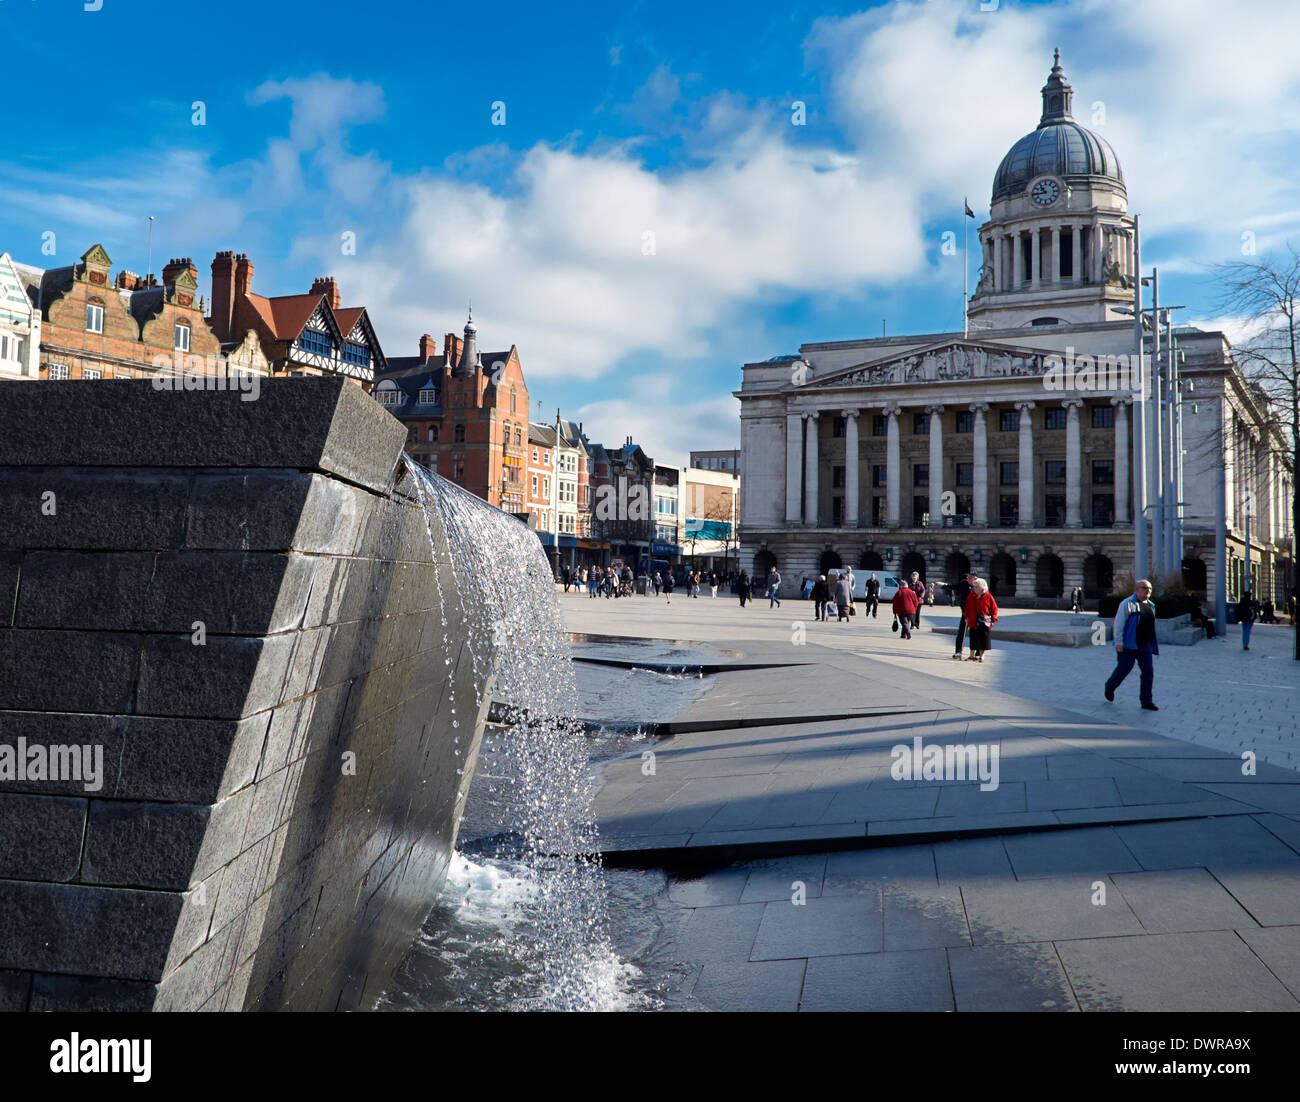 Nottingham England uk. Water feature in the old market square with the council house in the background Stock Photo